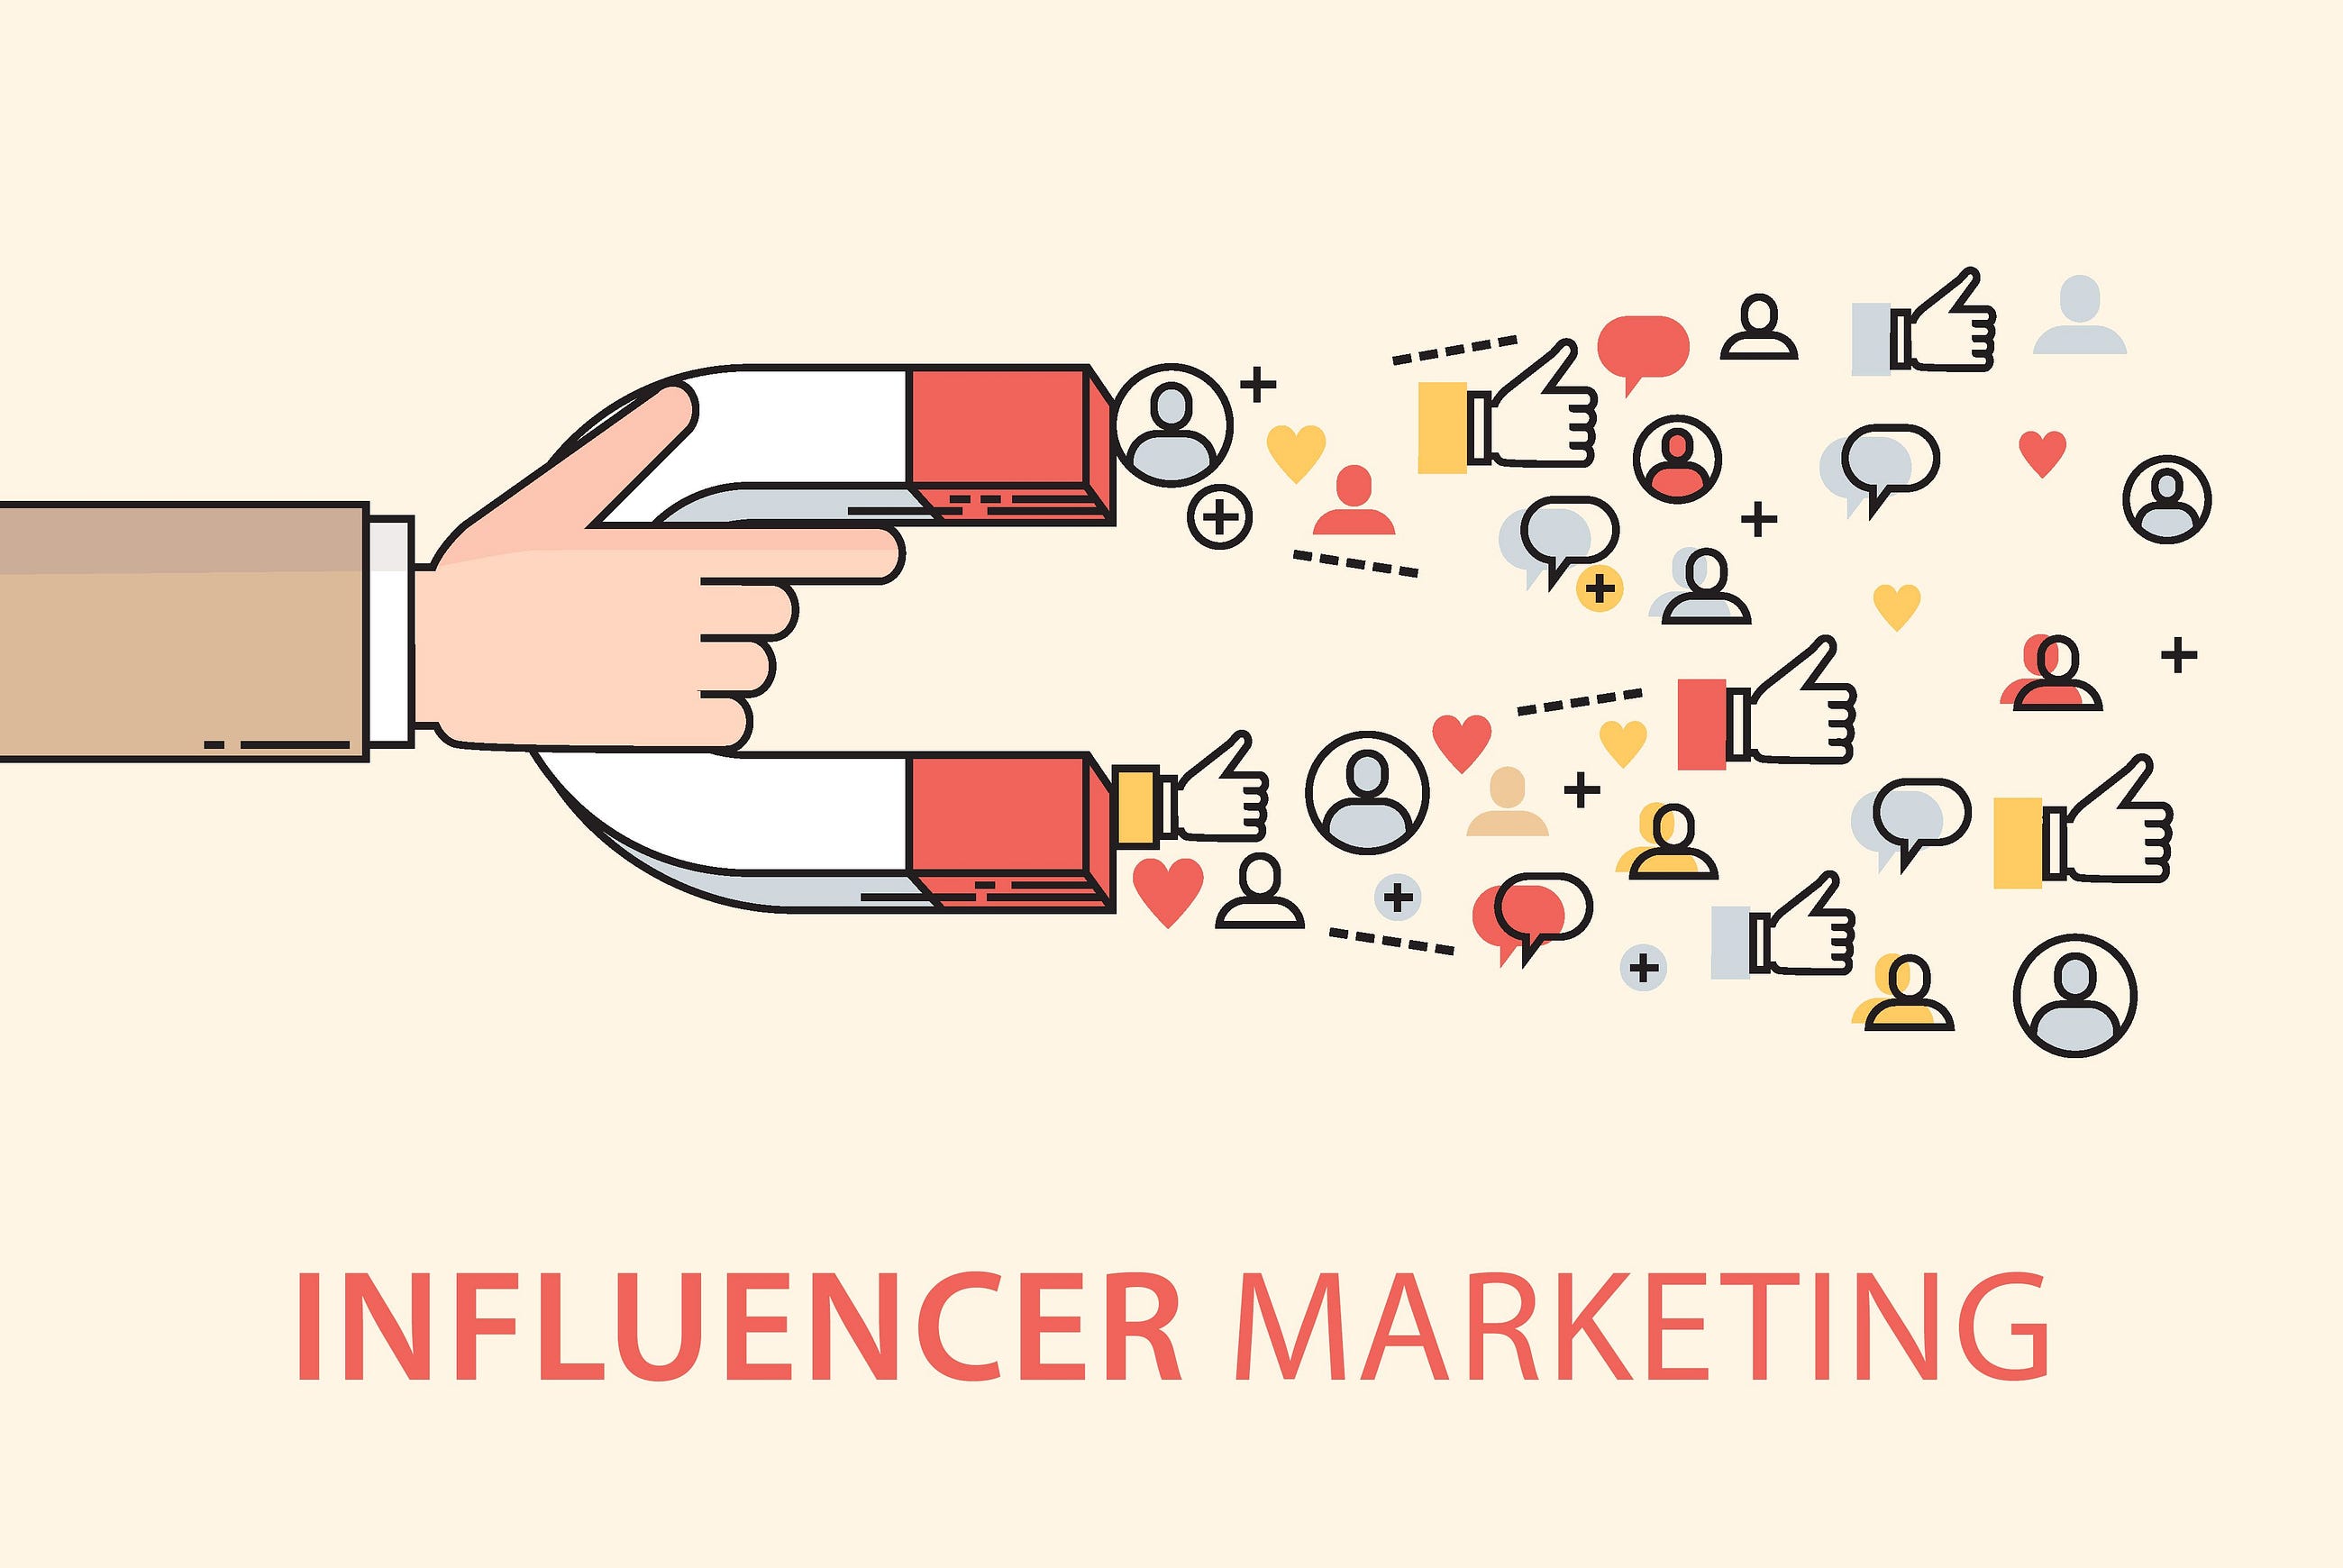 Influencer marketing will evolve from trend to a common marketing tactic